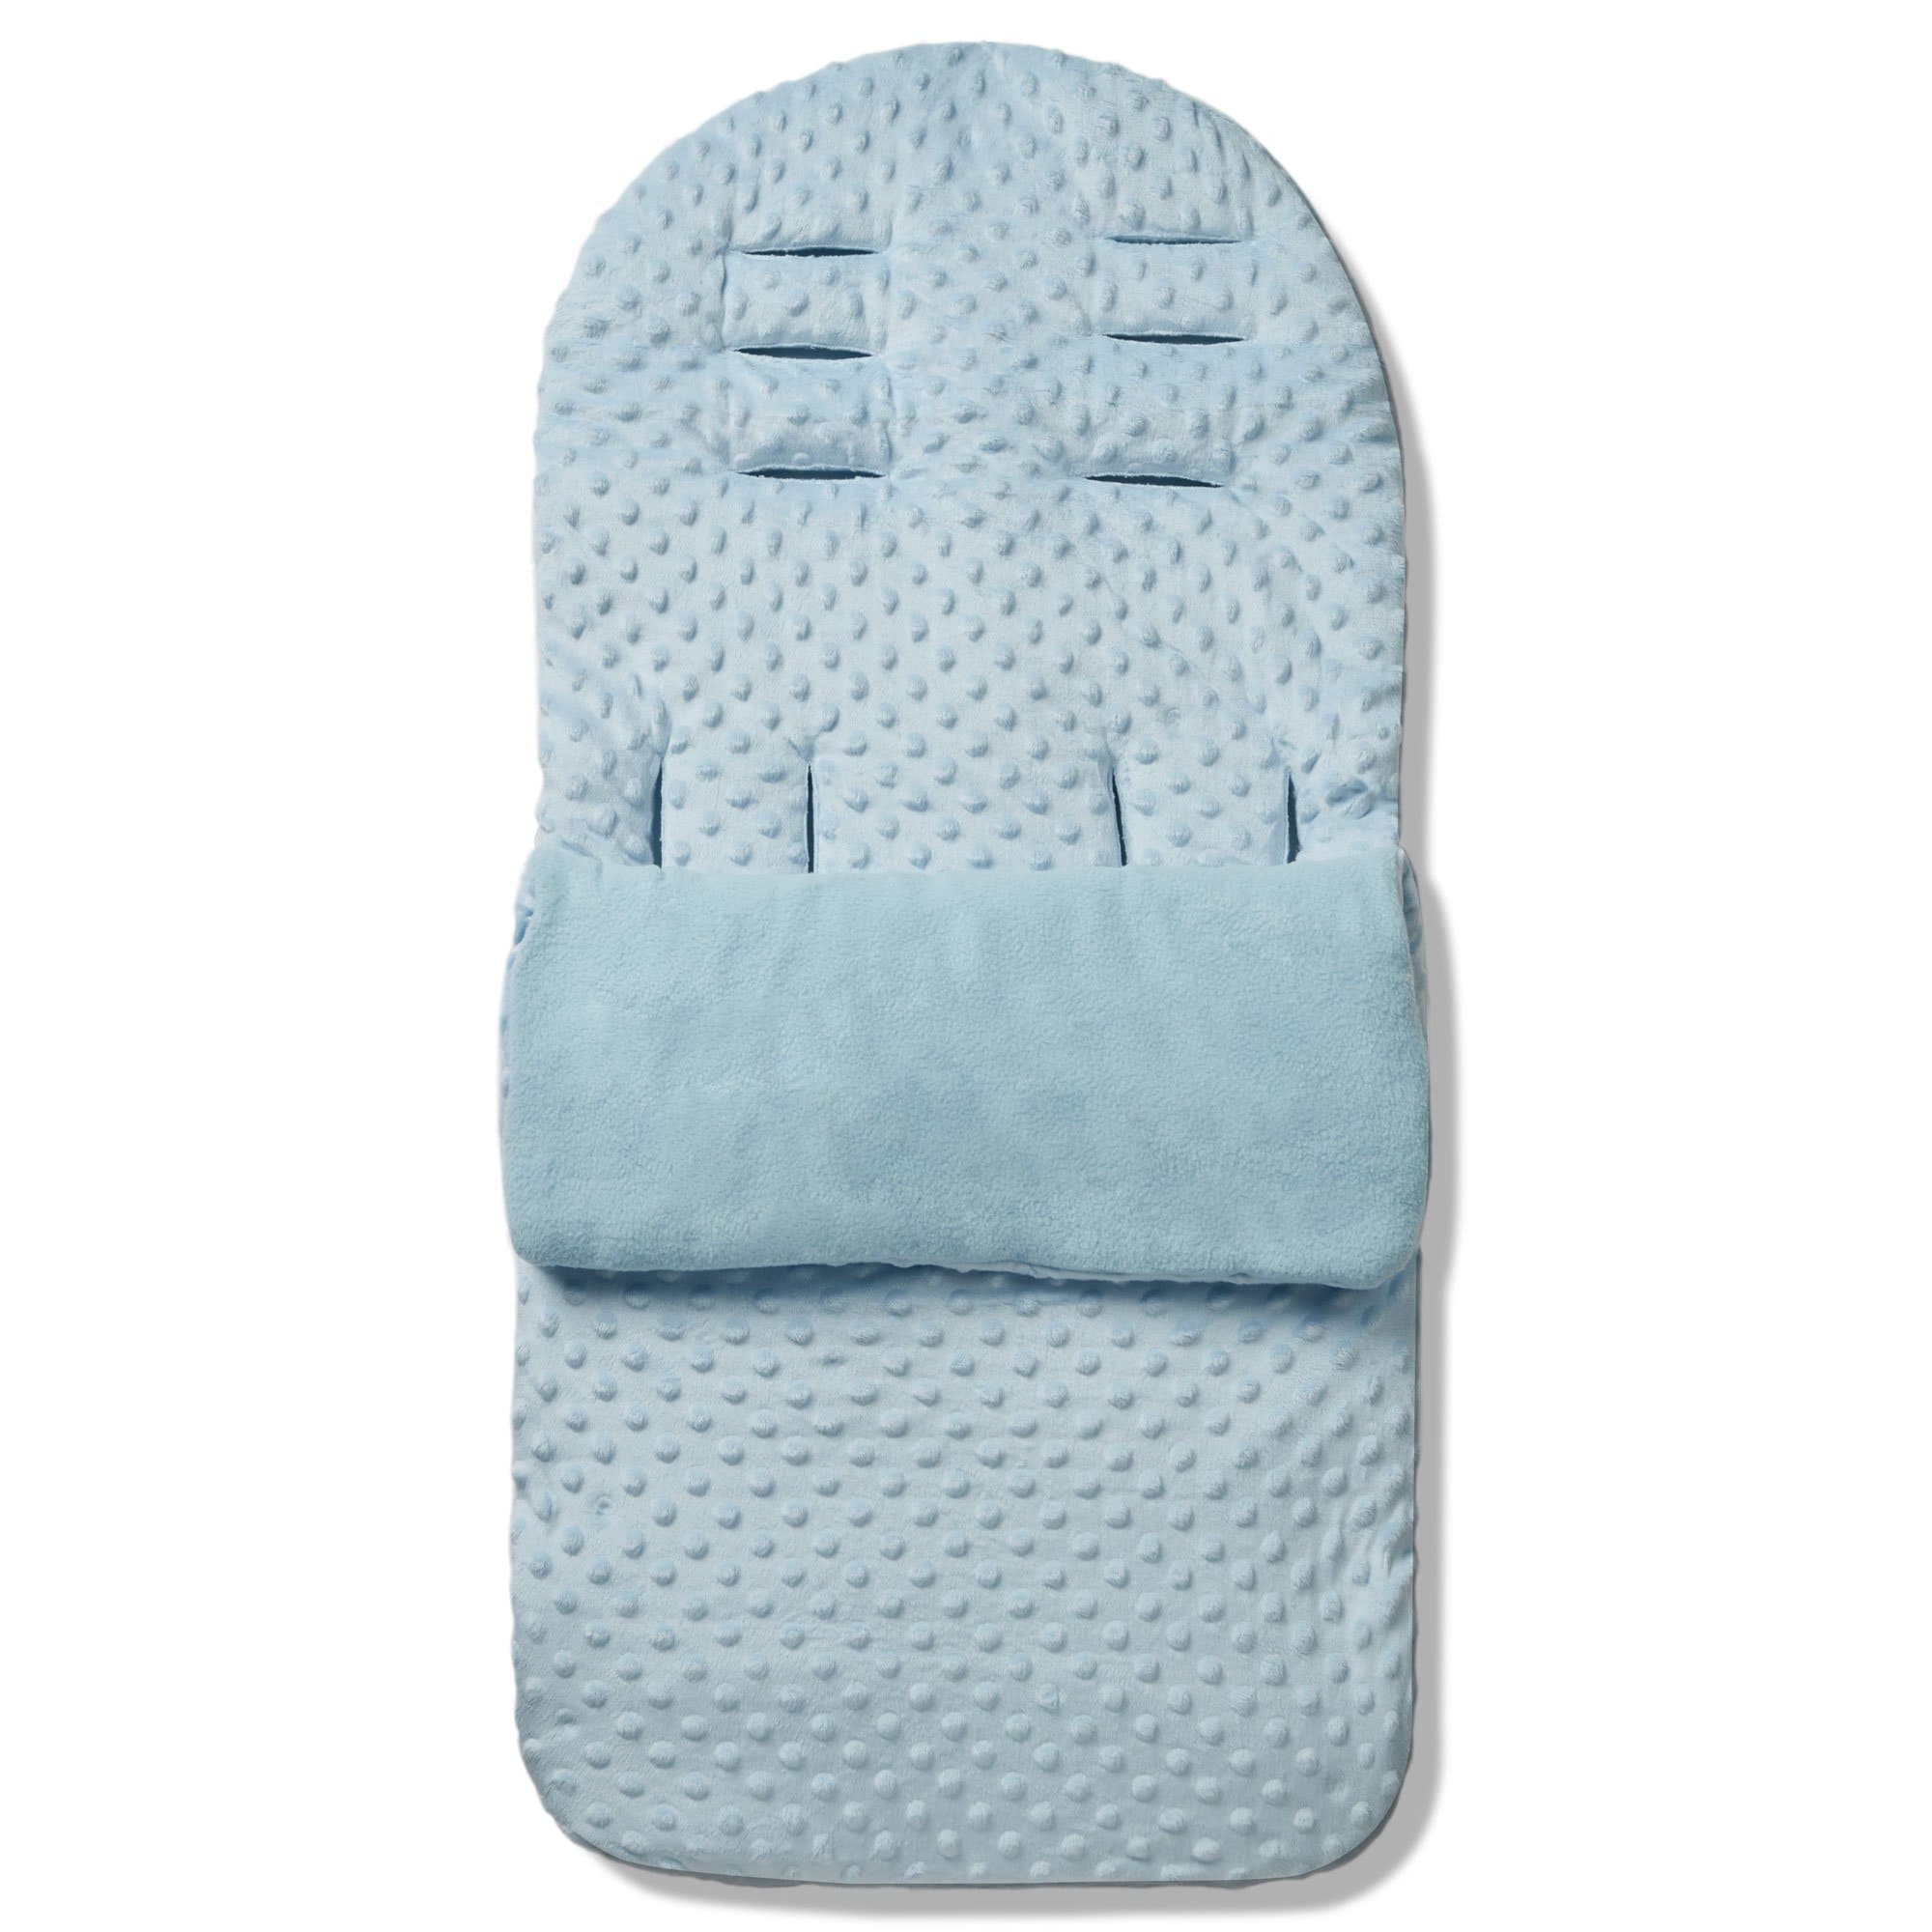 Dimple Footmuff / Cosy Toes Compatible with Chicco - Blue / Fits All Models | For Your Little One